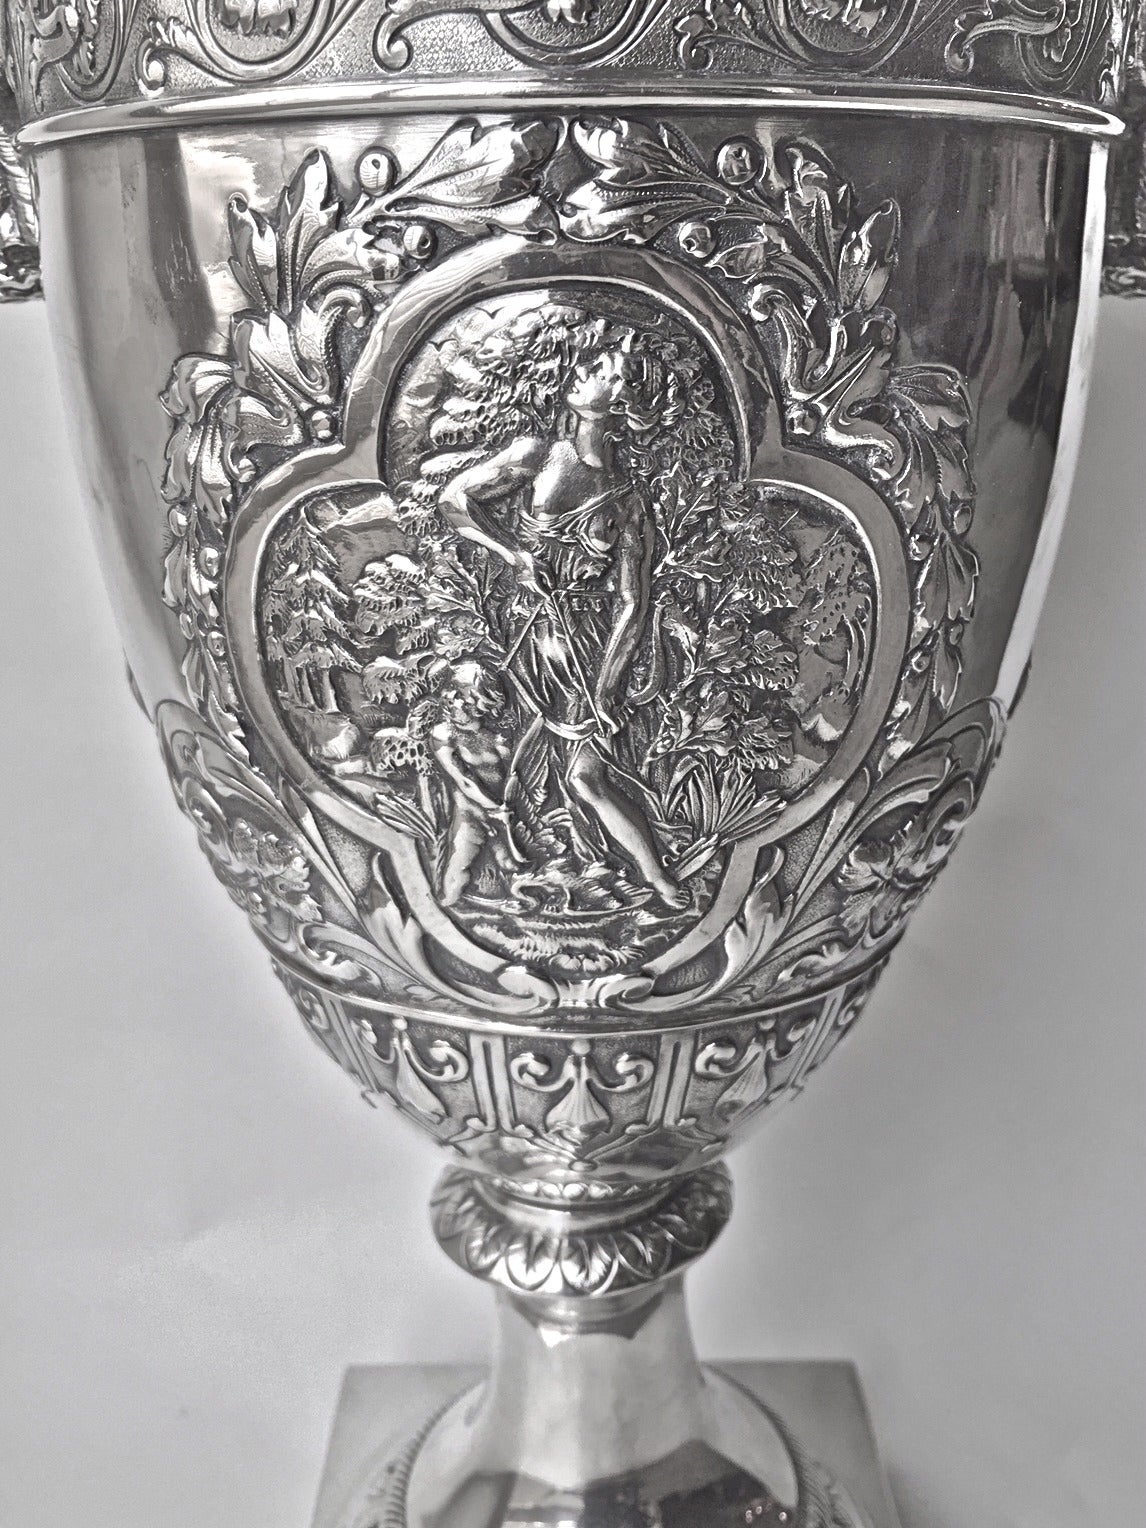 European Large Continental Silver Vase Cast and Chased Double Snake Handles, 19th Century